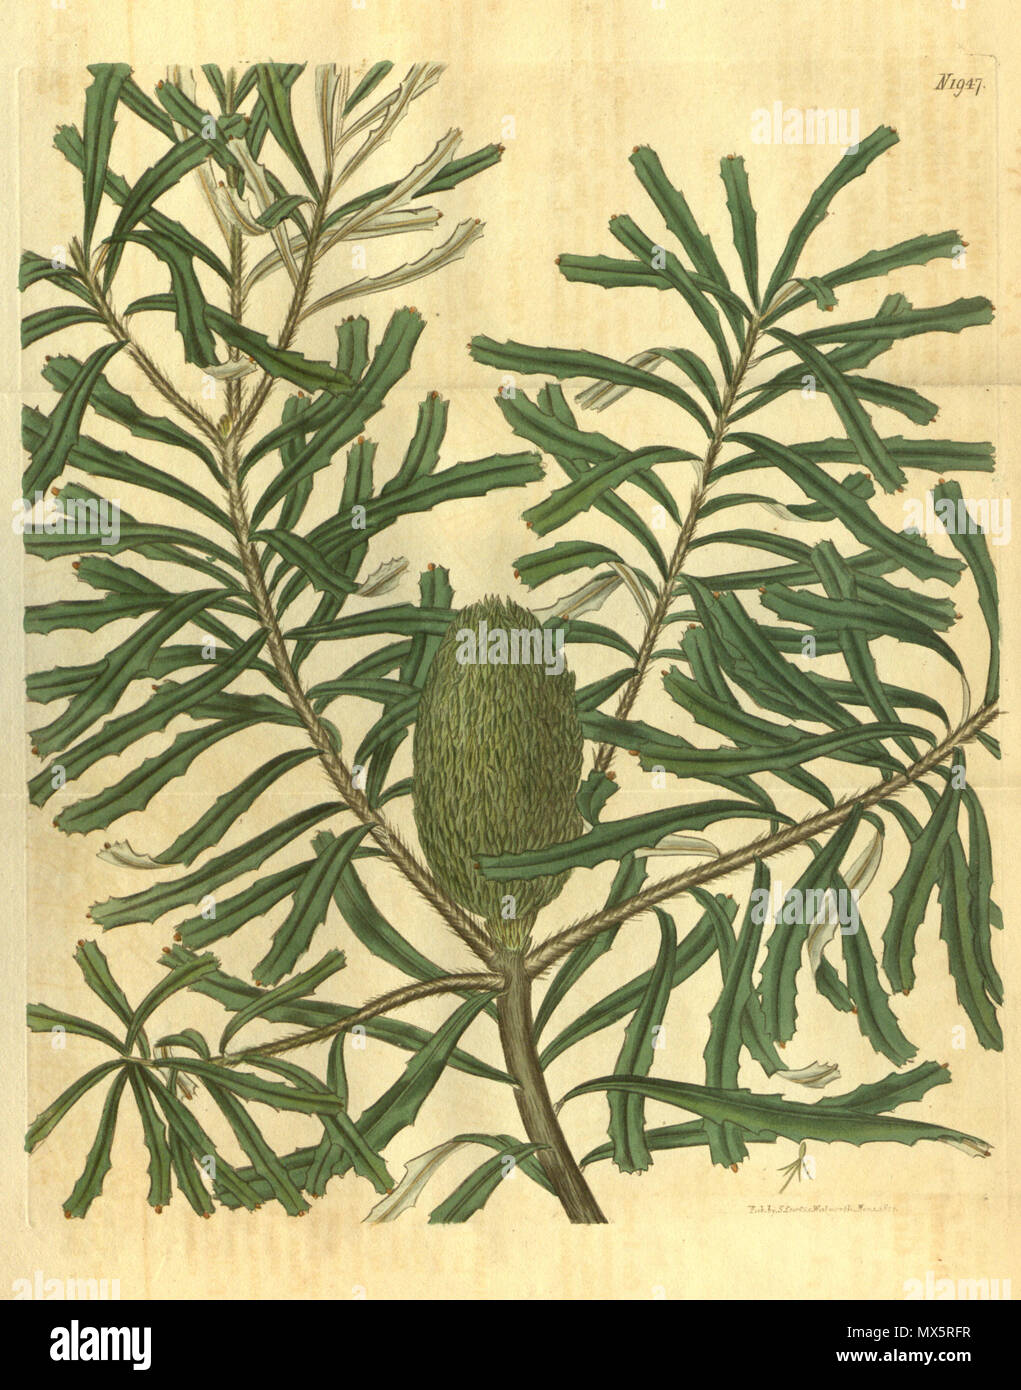 . This is an image of Plate 1947 from Volume 45 of Curtis's Botanical Magazine, entitled 'Banksia marginata (β) microstachya. Green-flowered various-leaved Banksia'. The plant depicted is Banksia marginata (Silver Banksia). 1843. The image has the signature of Samuel Curtis? and other indeterminate information. 94 Botanical Magazine 1947 Banksia marginata Stock Photo